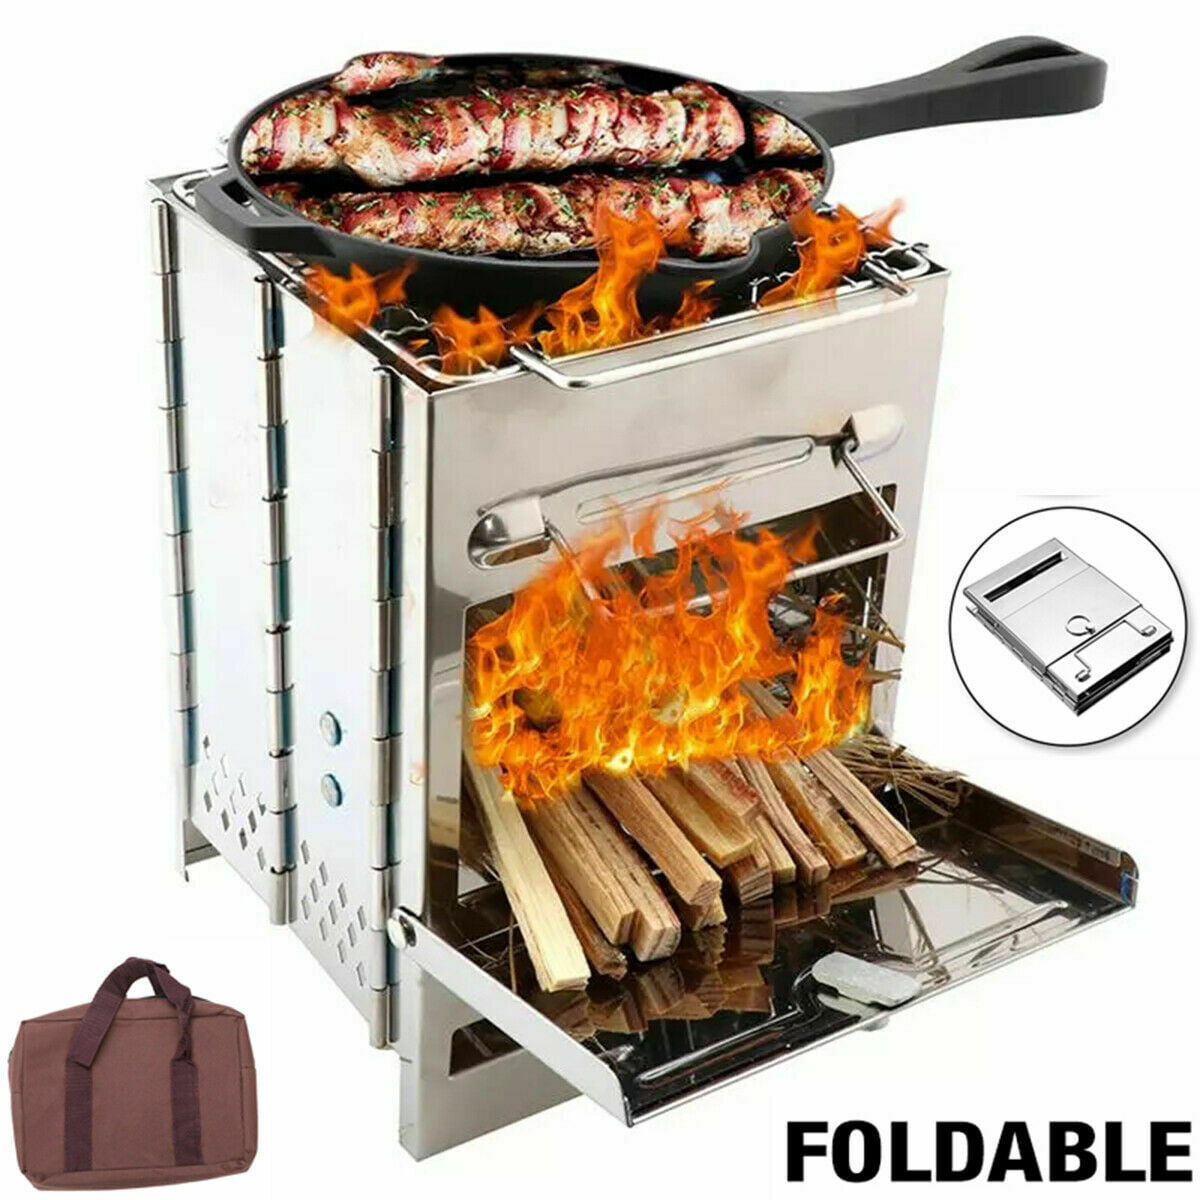 Outdoor Camping Cookware BBQ Barbecue Wood Burning Stove Portable Foldable Grill 